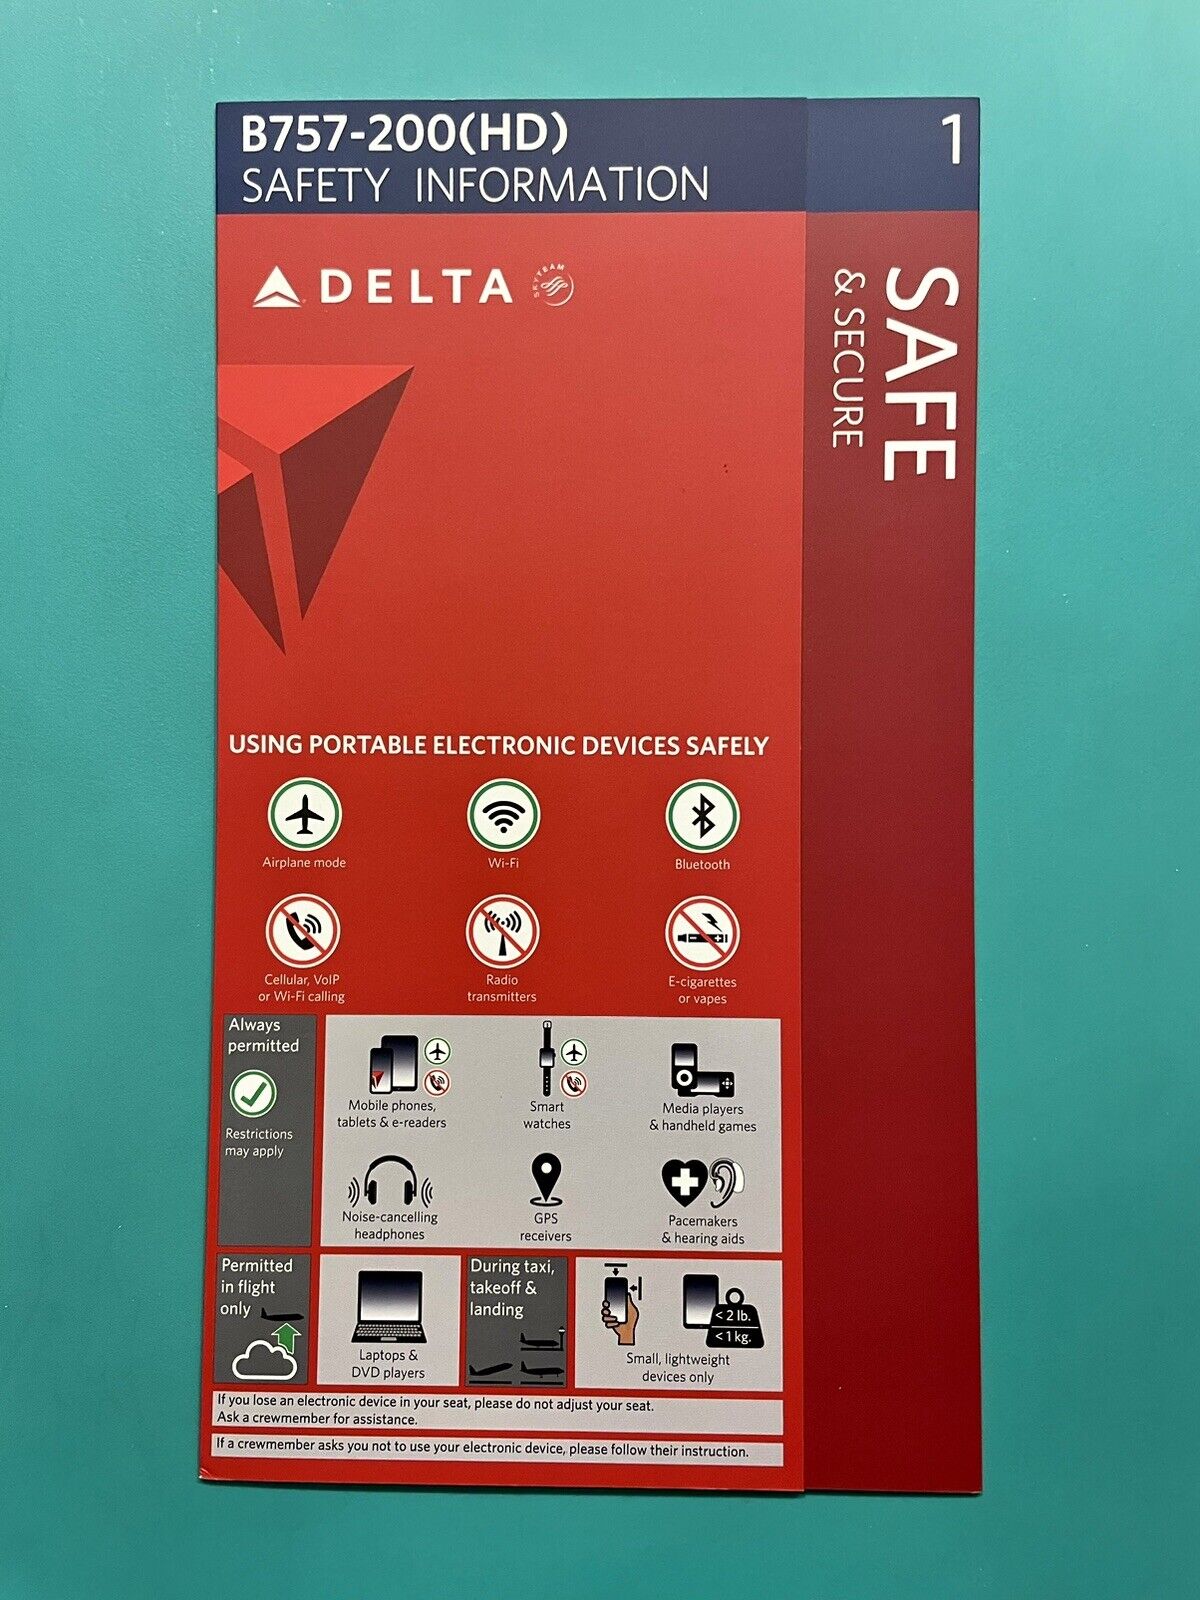 2020 DELTA AIRLINES SAFETY CARD--757-200HD